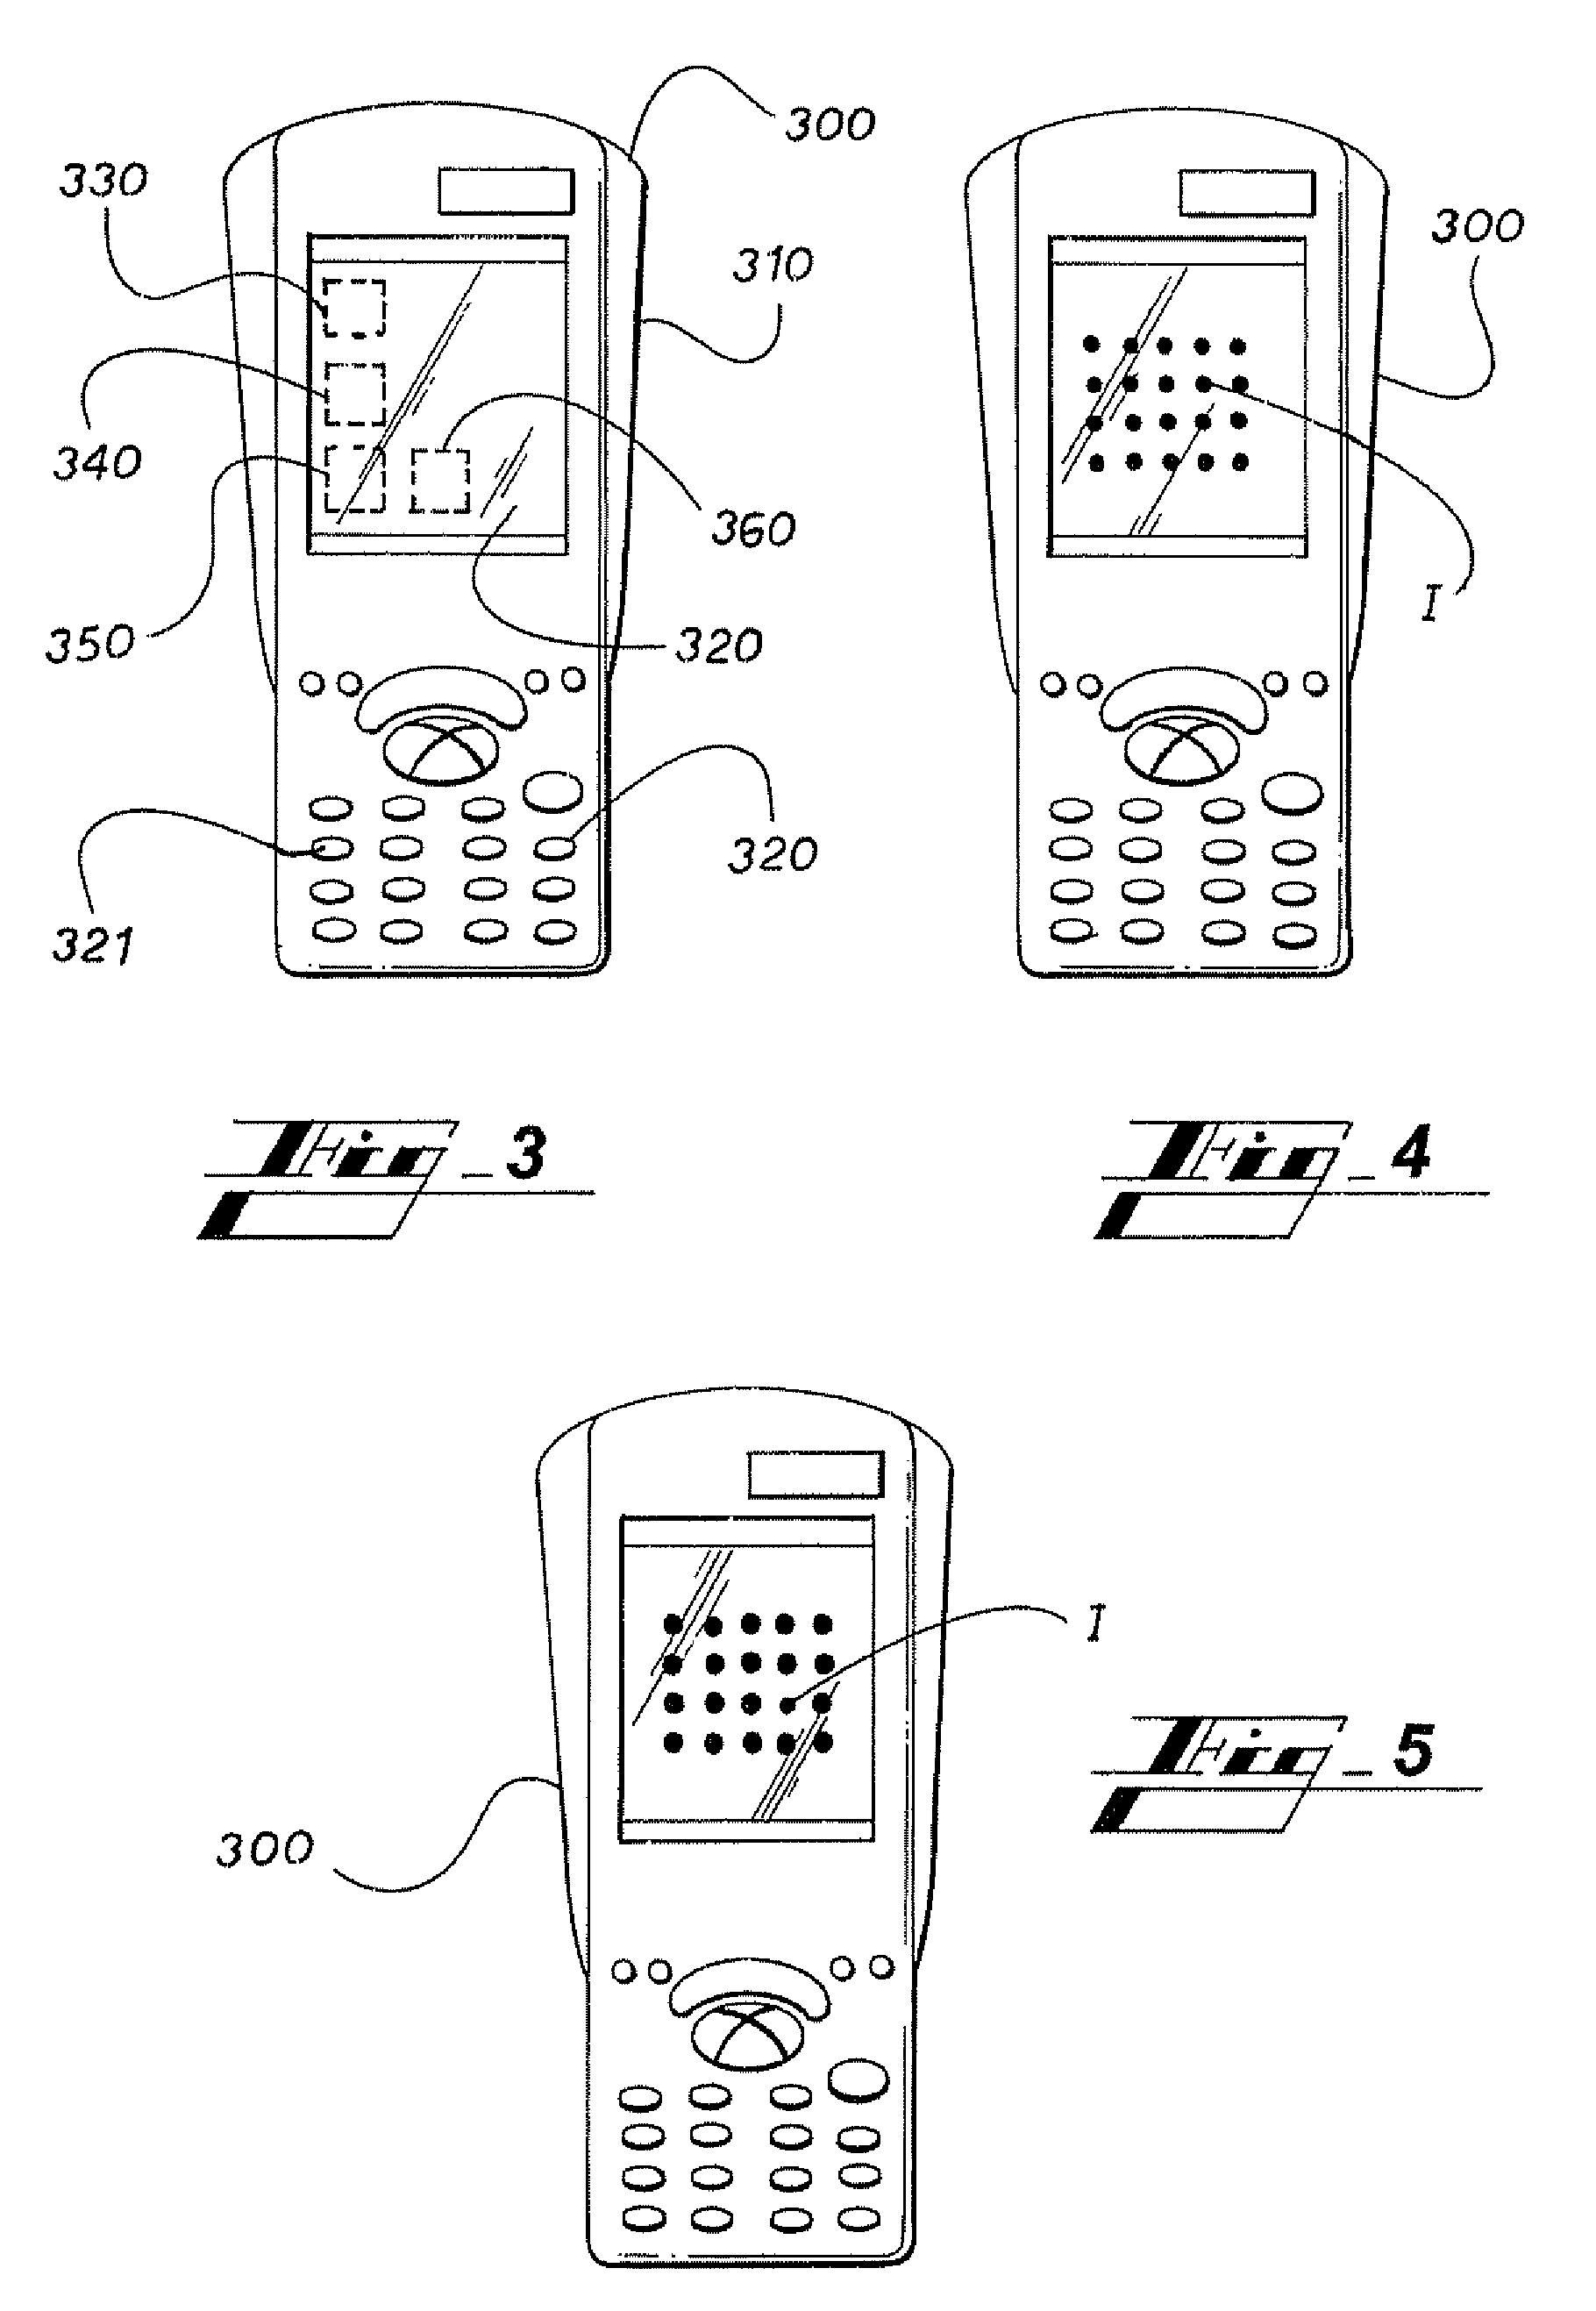 Biological parameter monitoring system and method therefor